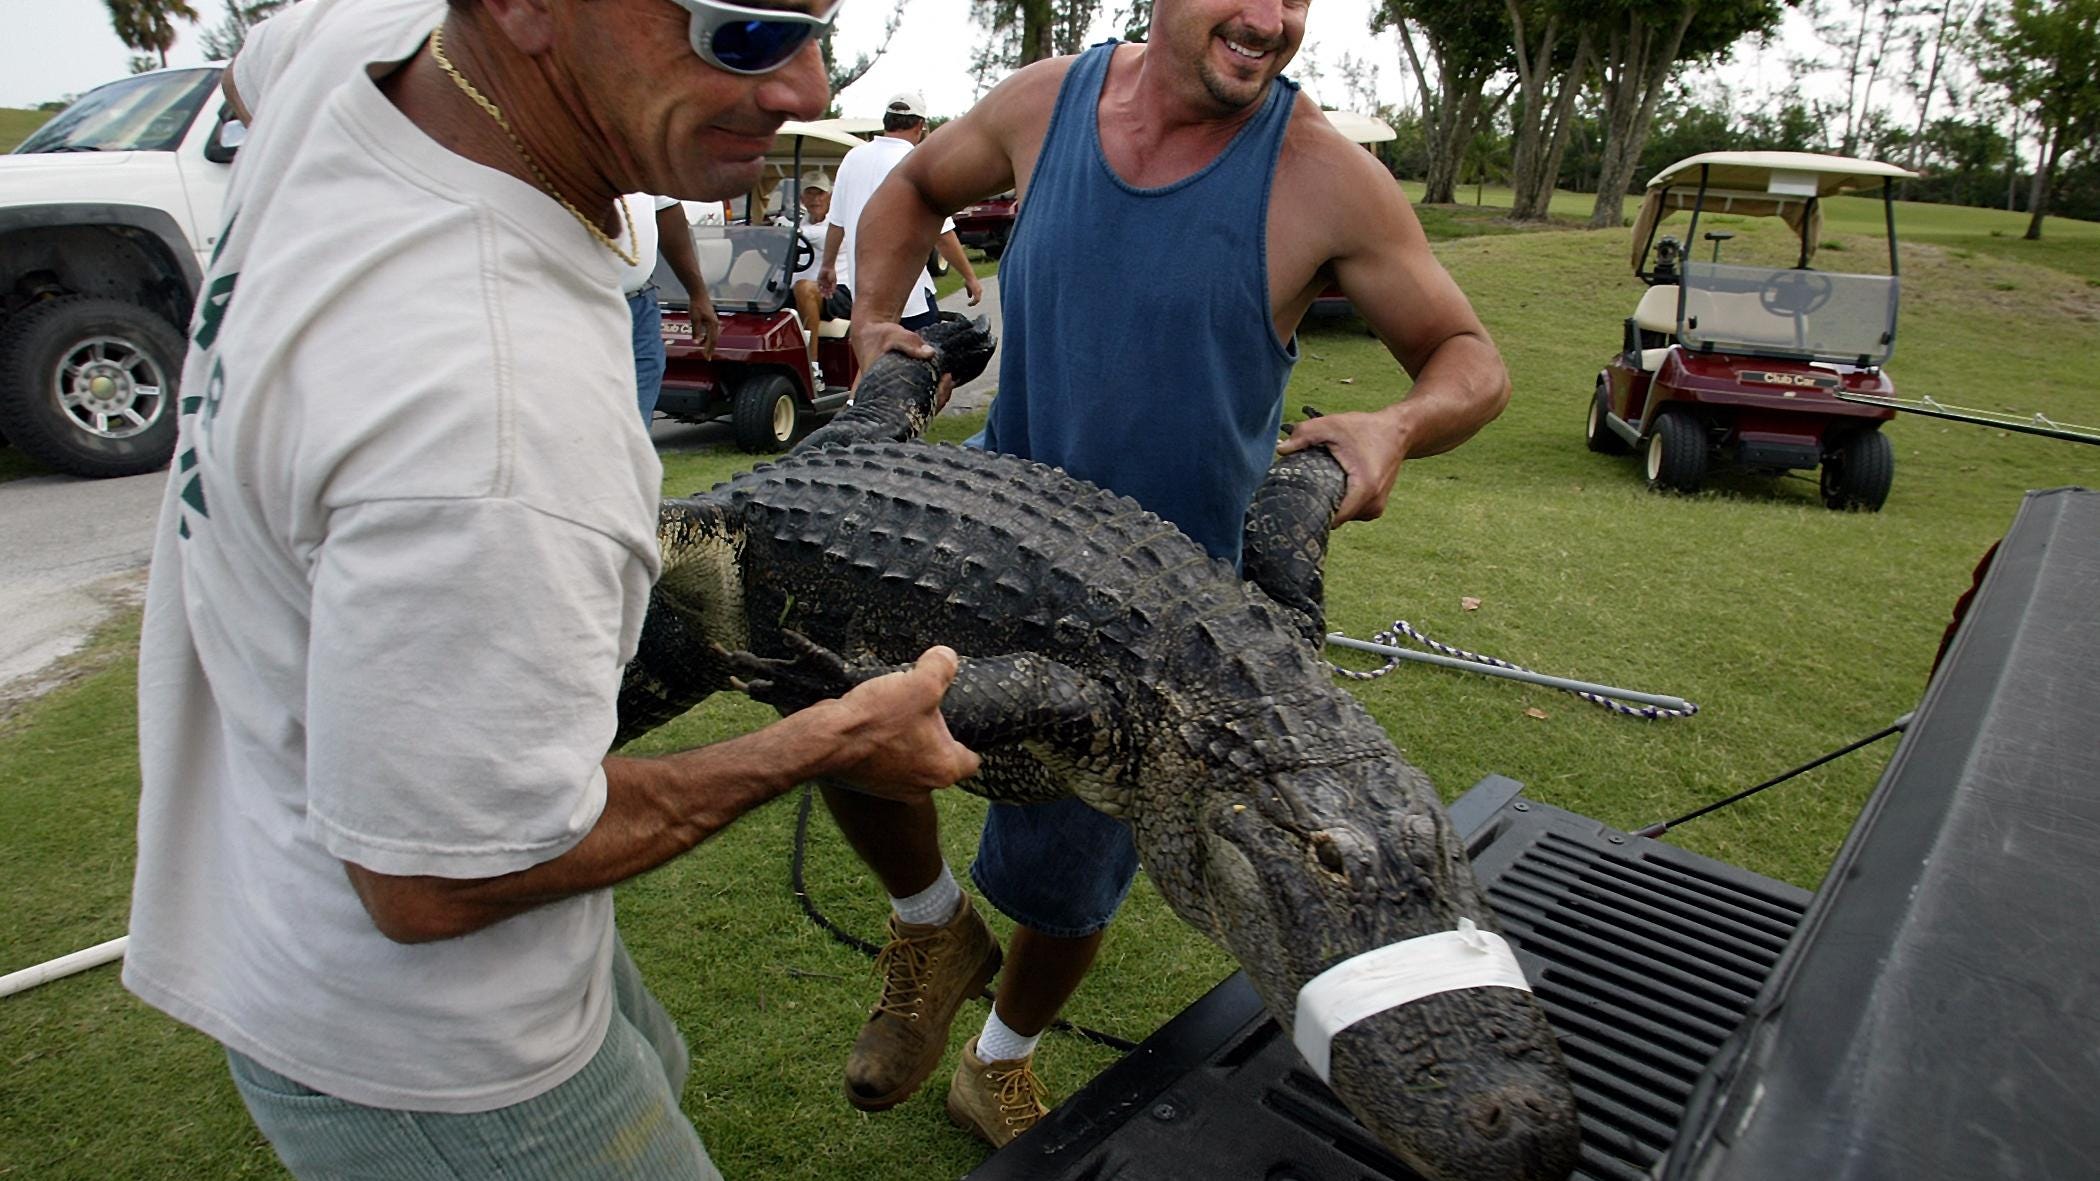 Florida gator trappers, who do it cuz their daddies did, want more $$ per  skin